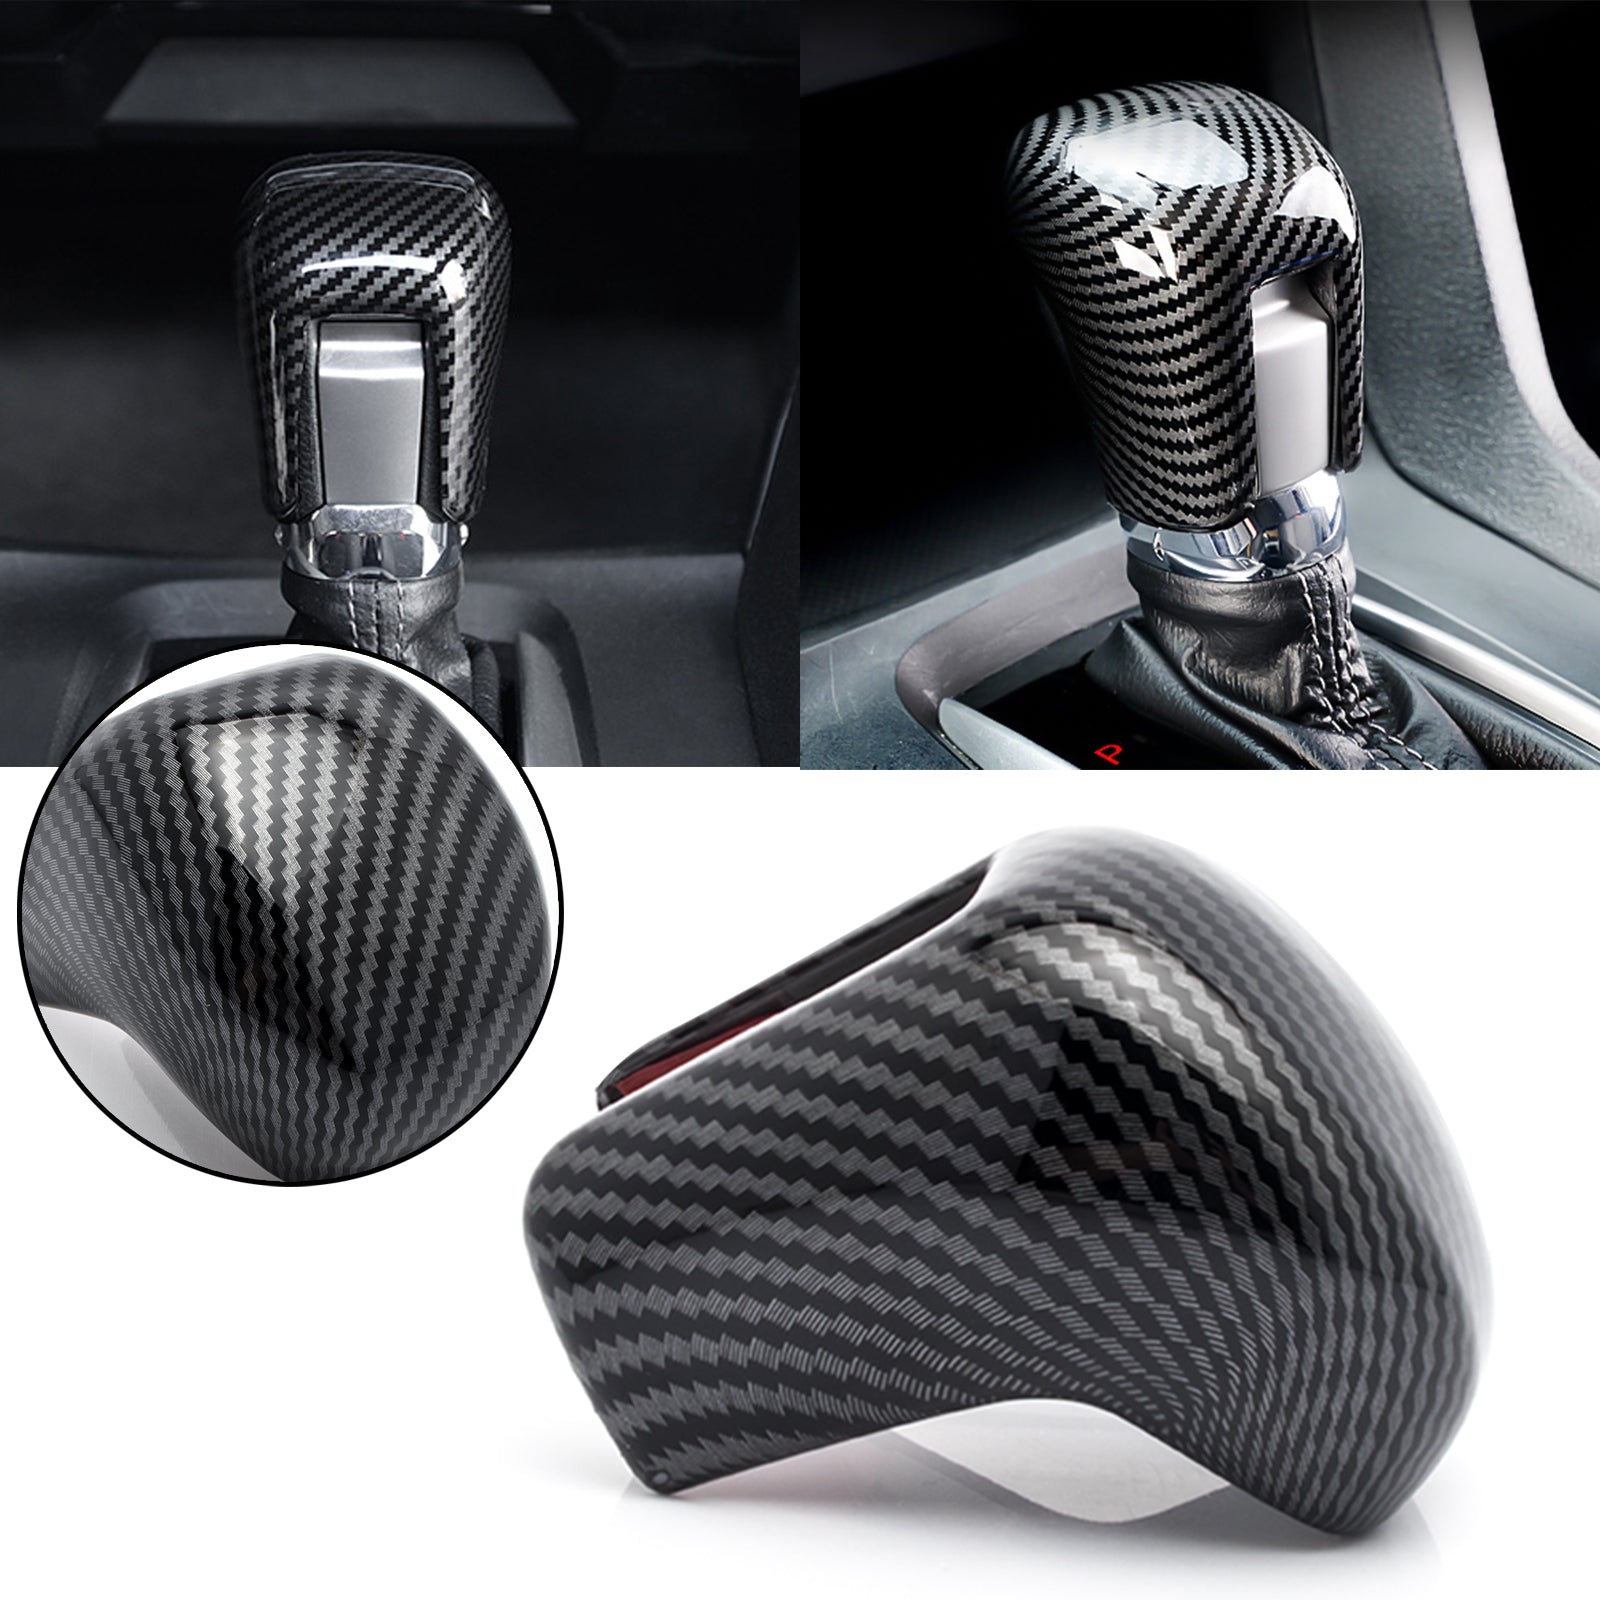 GEAR LEVER PROTECTION - Gear Central